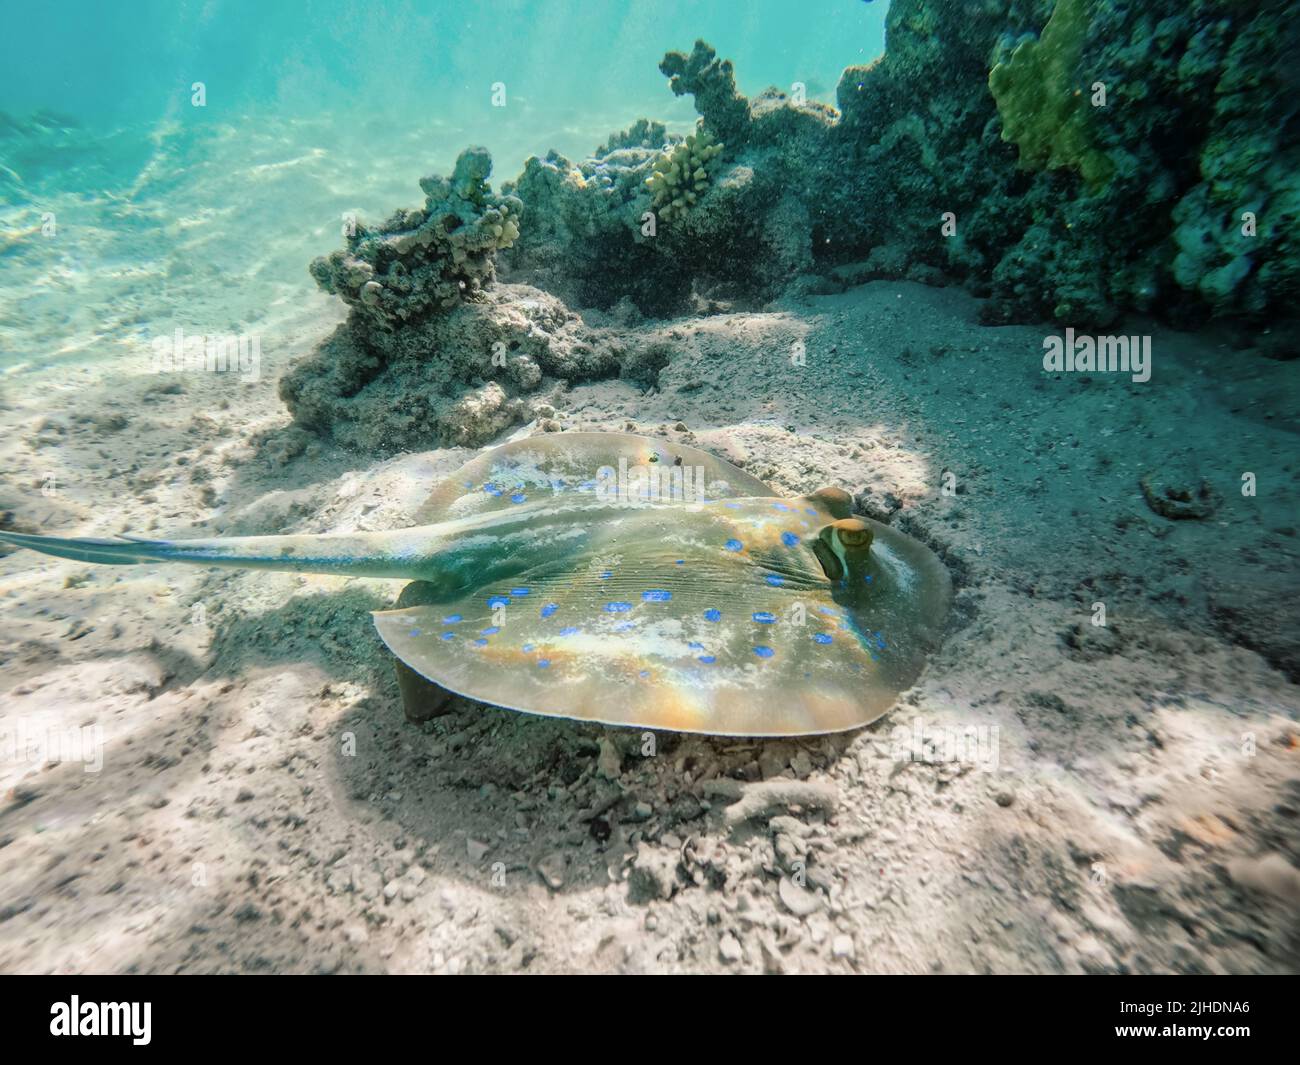 Bluespotted ribbontail ray (Taeniura lymma) species of stingray in the Red Sea, Amazing underwater animal in Marsa Alam, Egypt Stock Photo